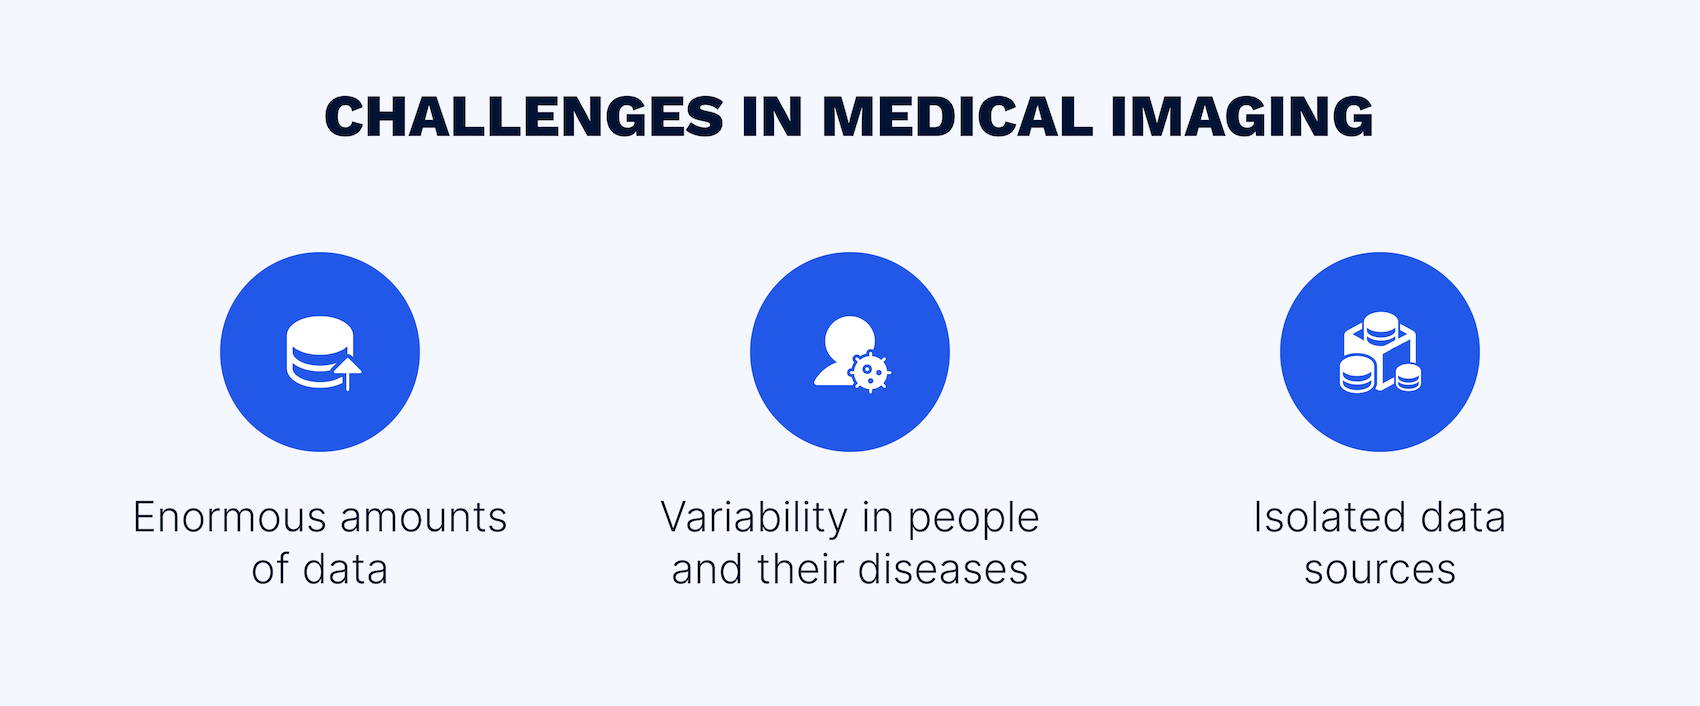 The examples of challenges in medical image processing